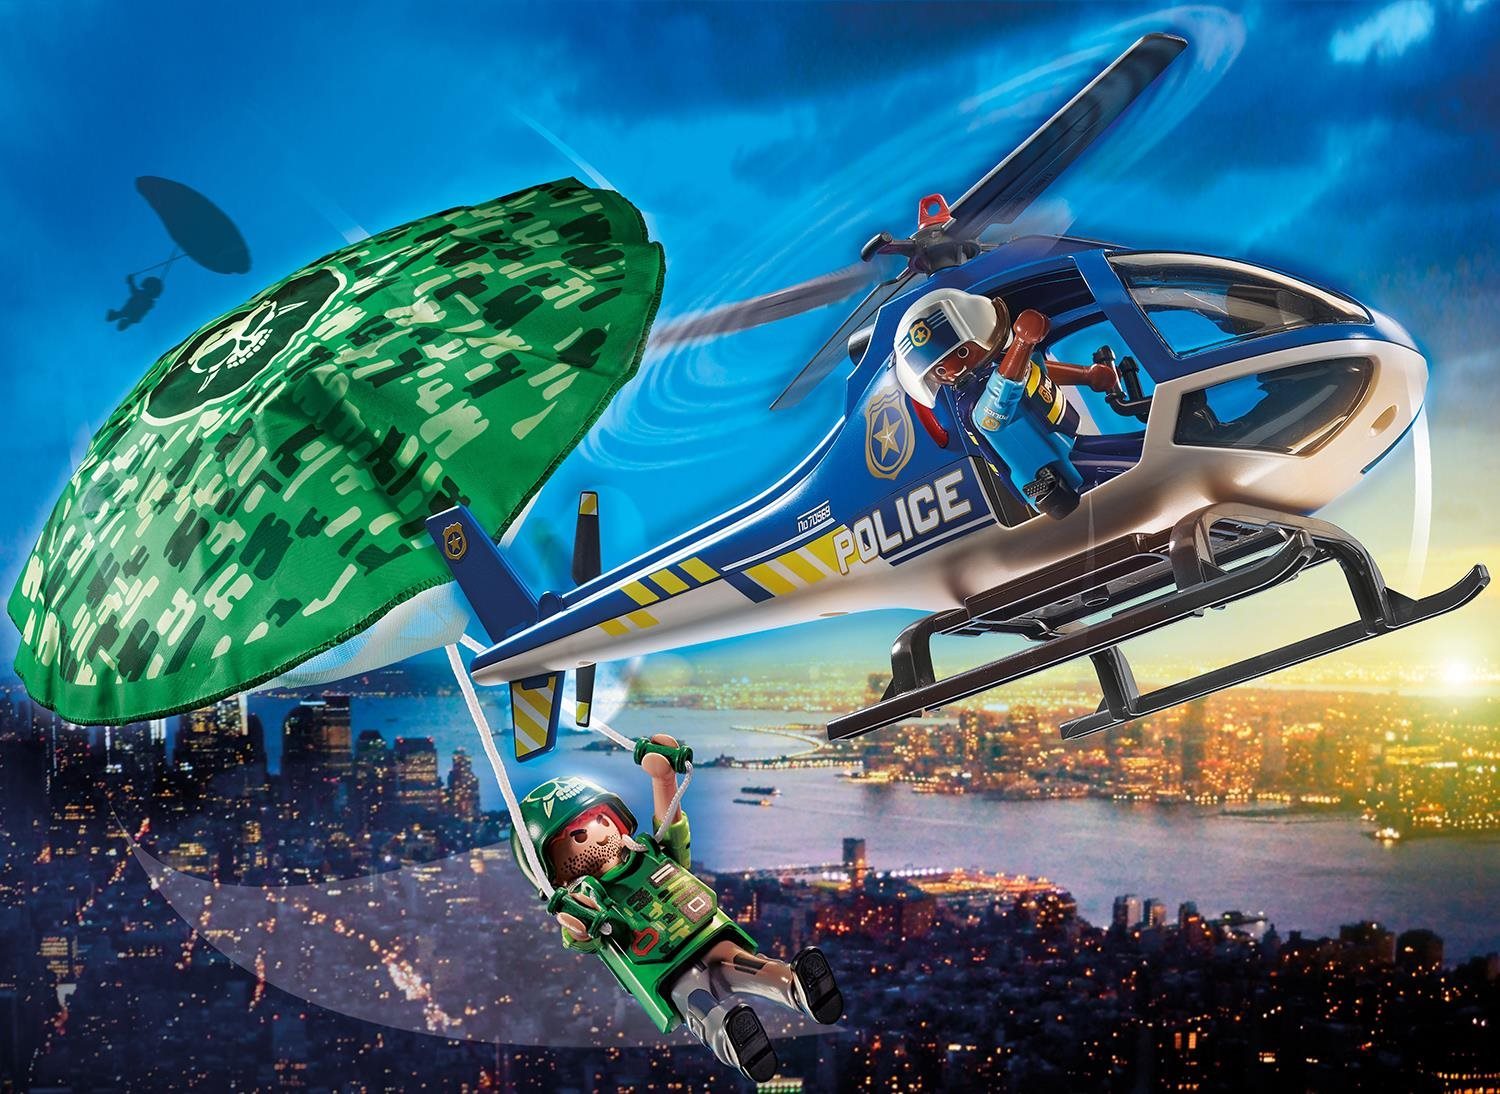 Building Set Playmobil 70569 Police Helicopter: Chase the Parachute Lifestyle